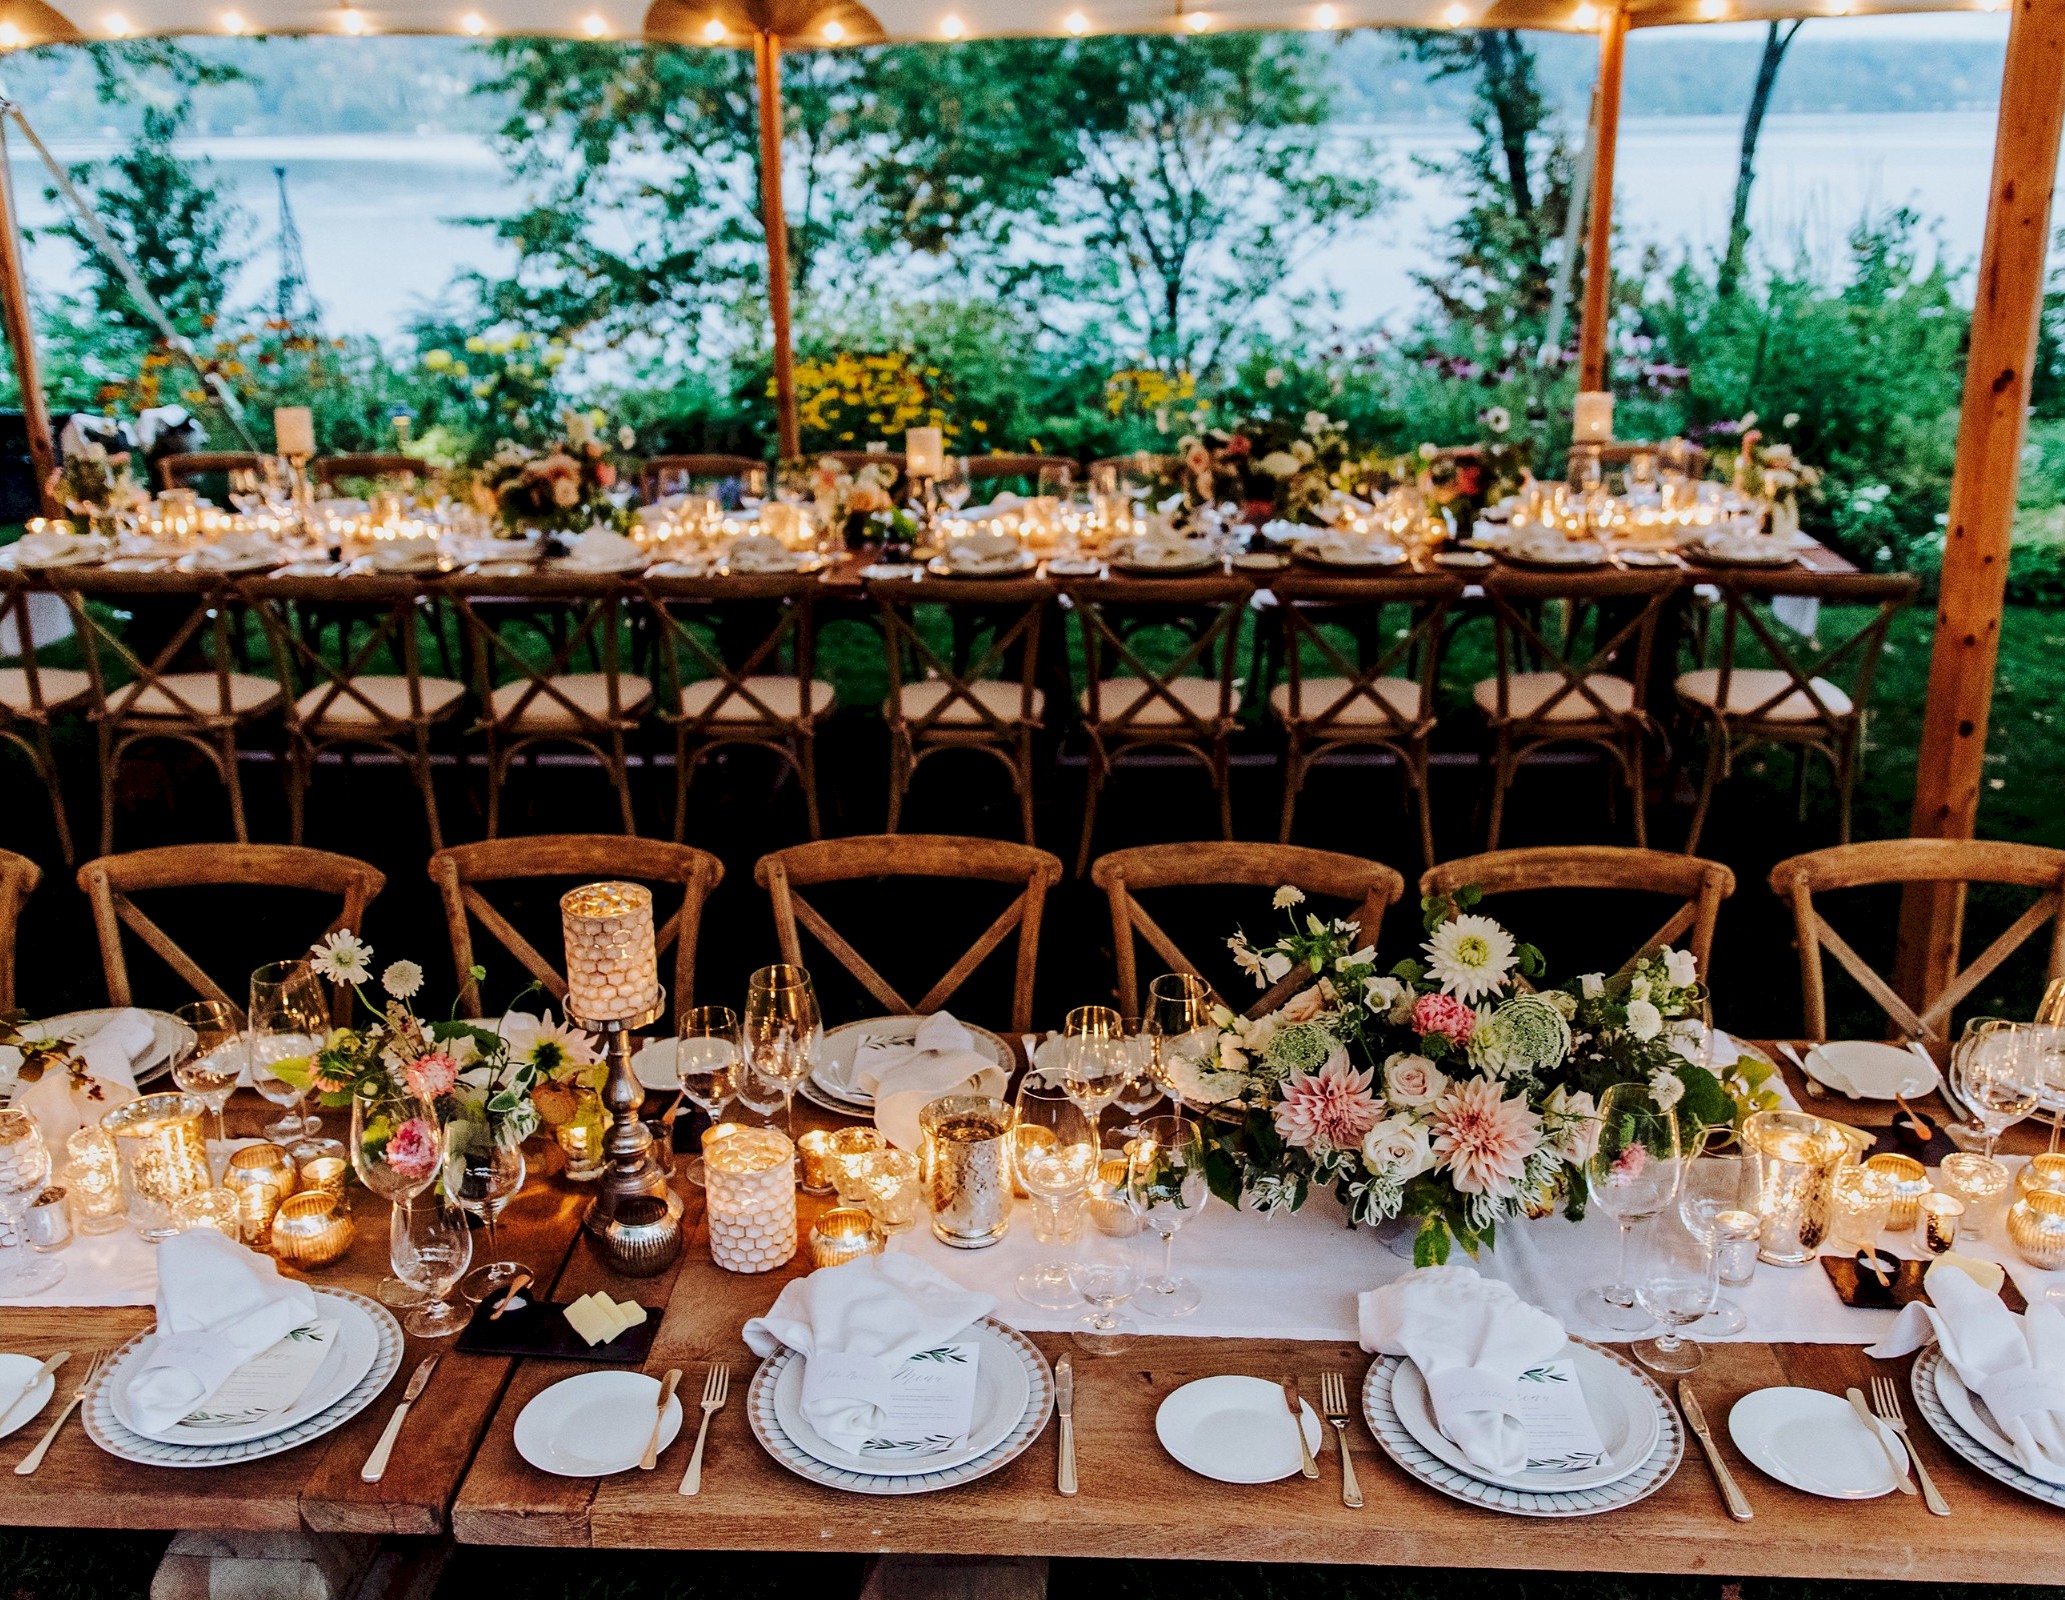 Beautifully laid tables for dinner by the lake